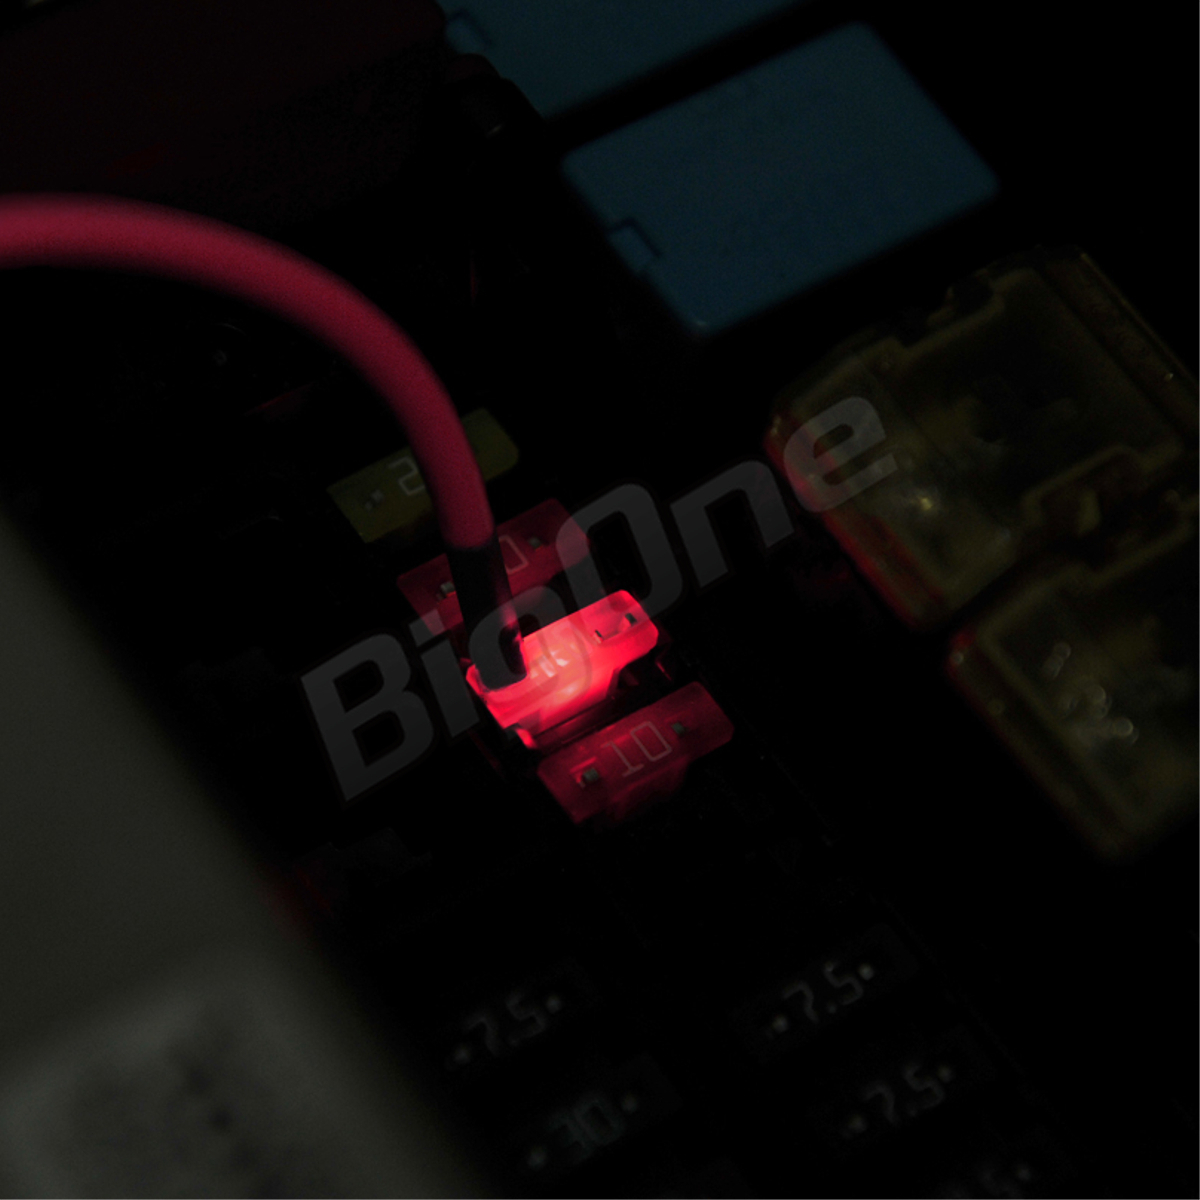 BigOne torn .. light ...... indicator built-in Mini flat type fuse power supply 20A ASP LED chigar lighter ETC drive recorder. connection 